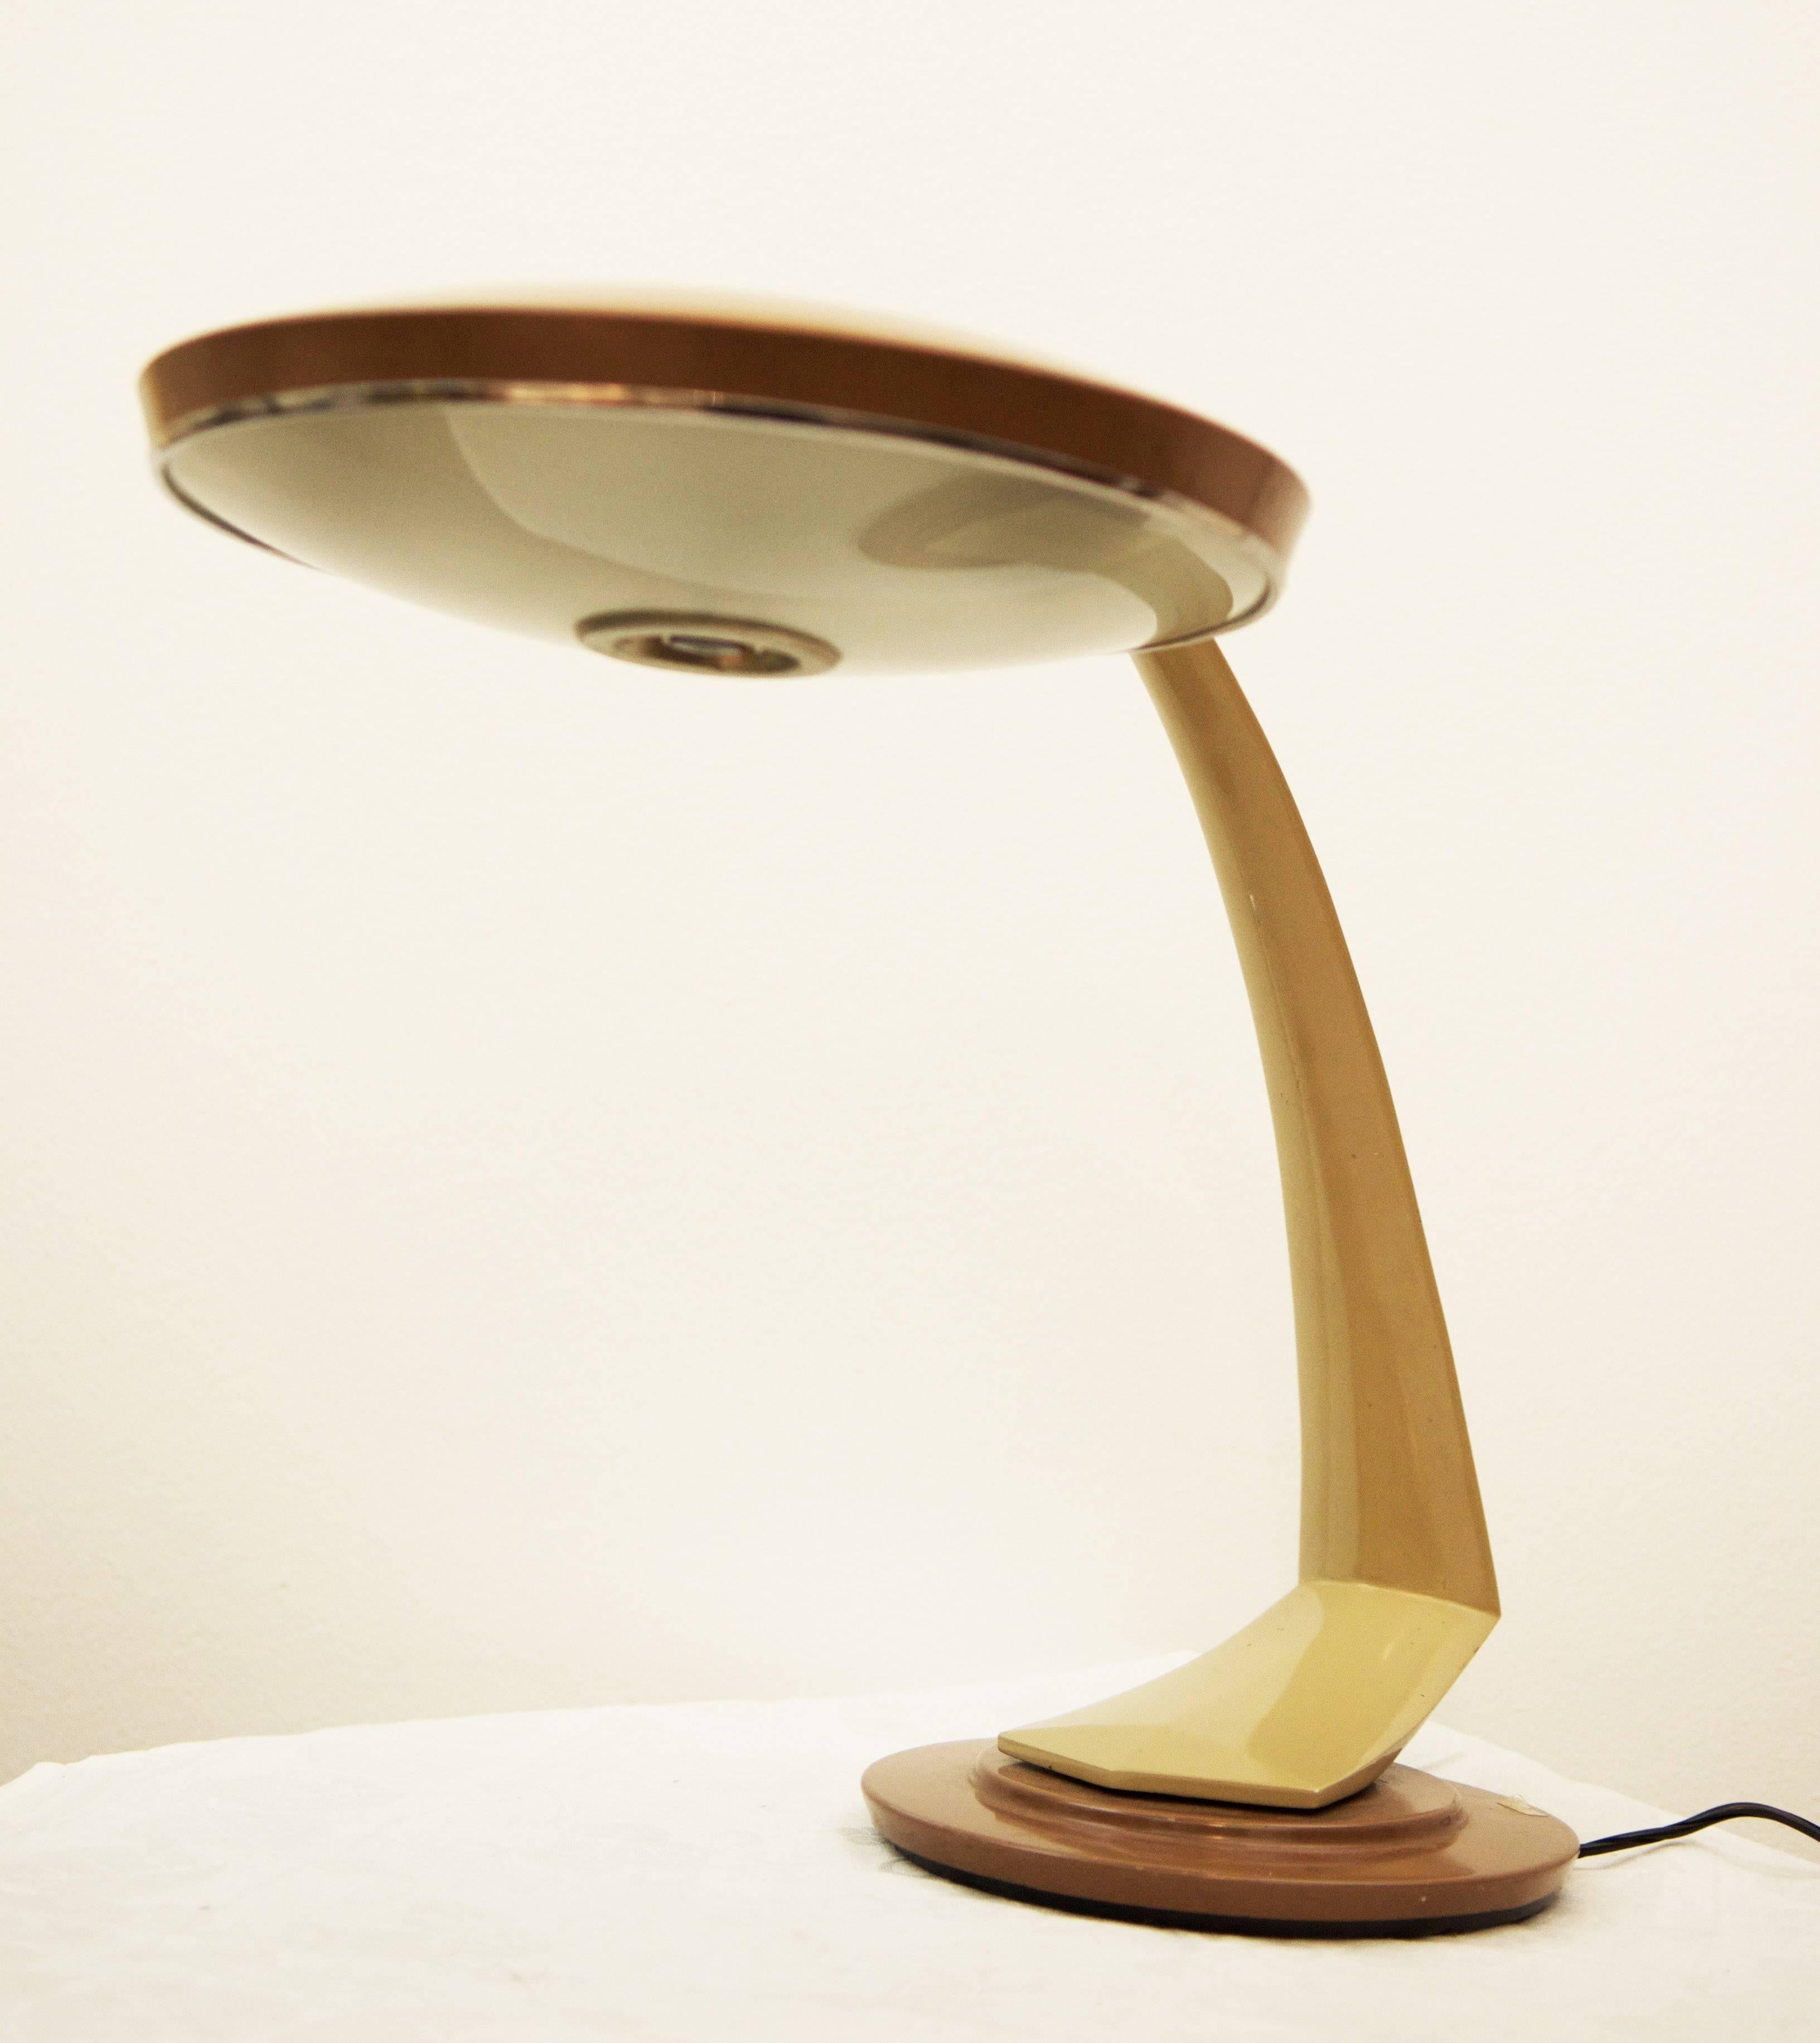 Midcentury spanish desk lamp with swivel arm and a switch at the base of the lamp head, Madrid from the 1960s.
Labelled on the base FASE, in two tones brown and baige. 